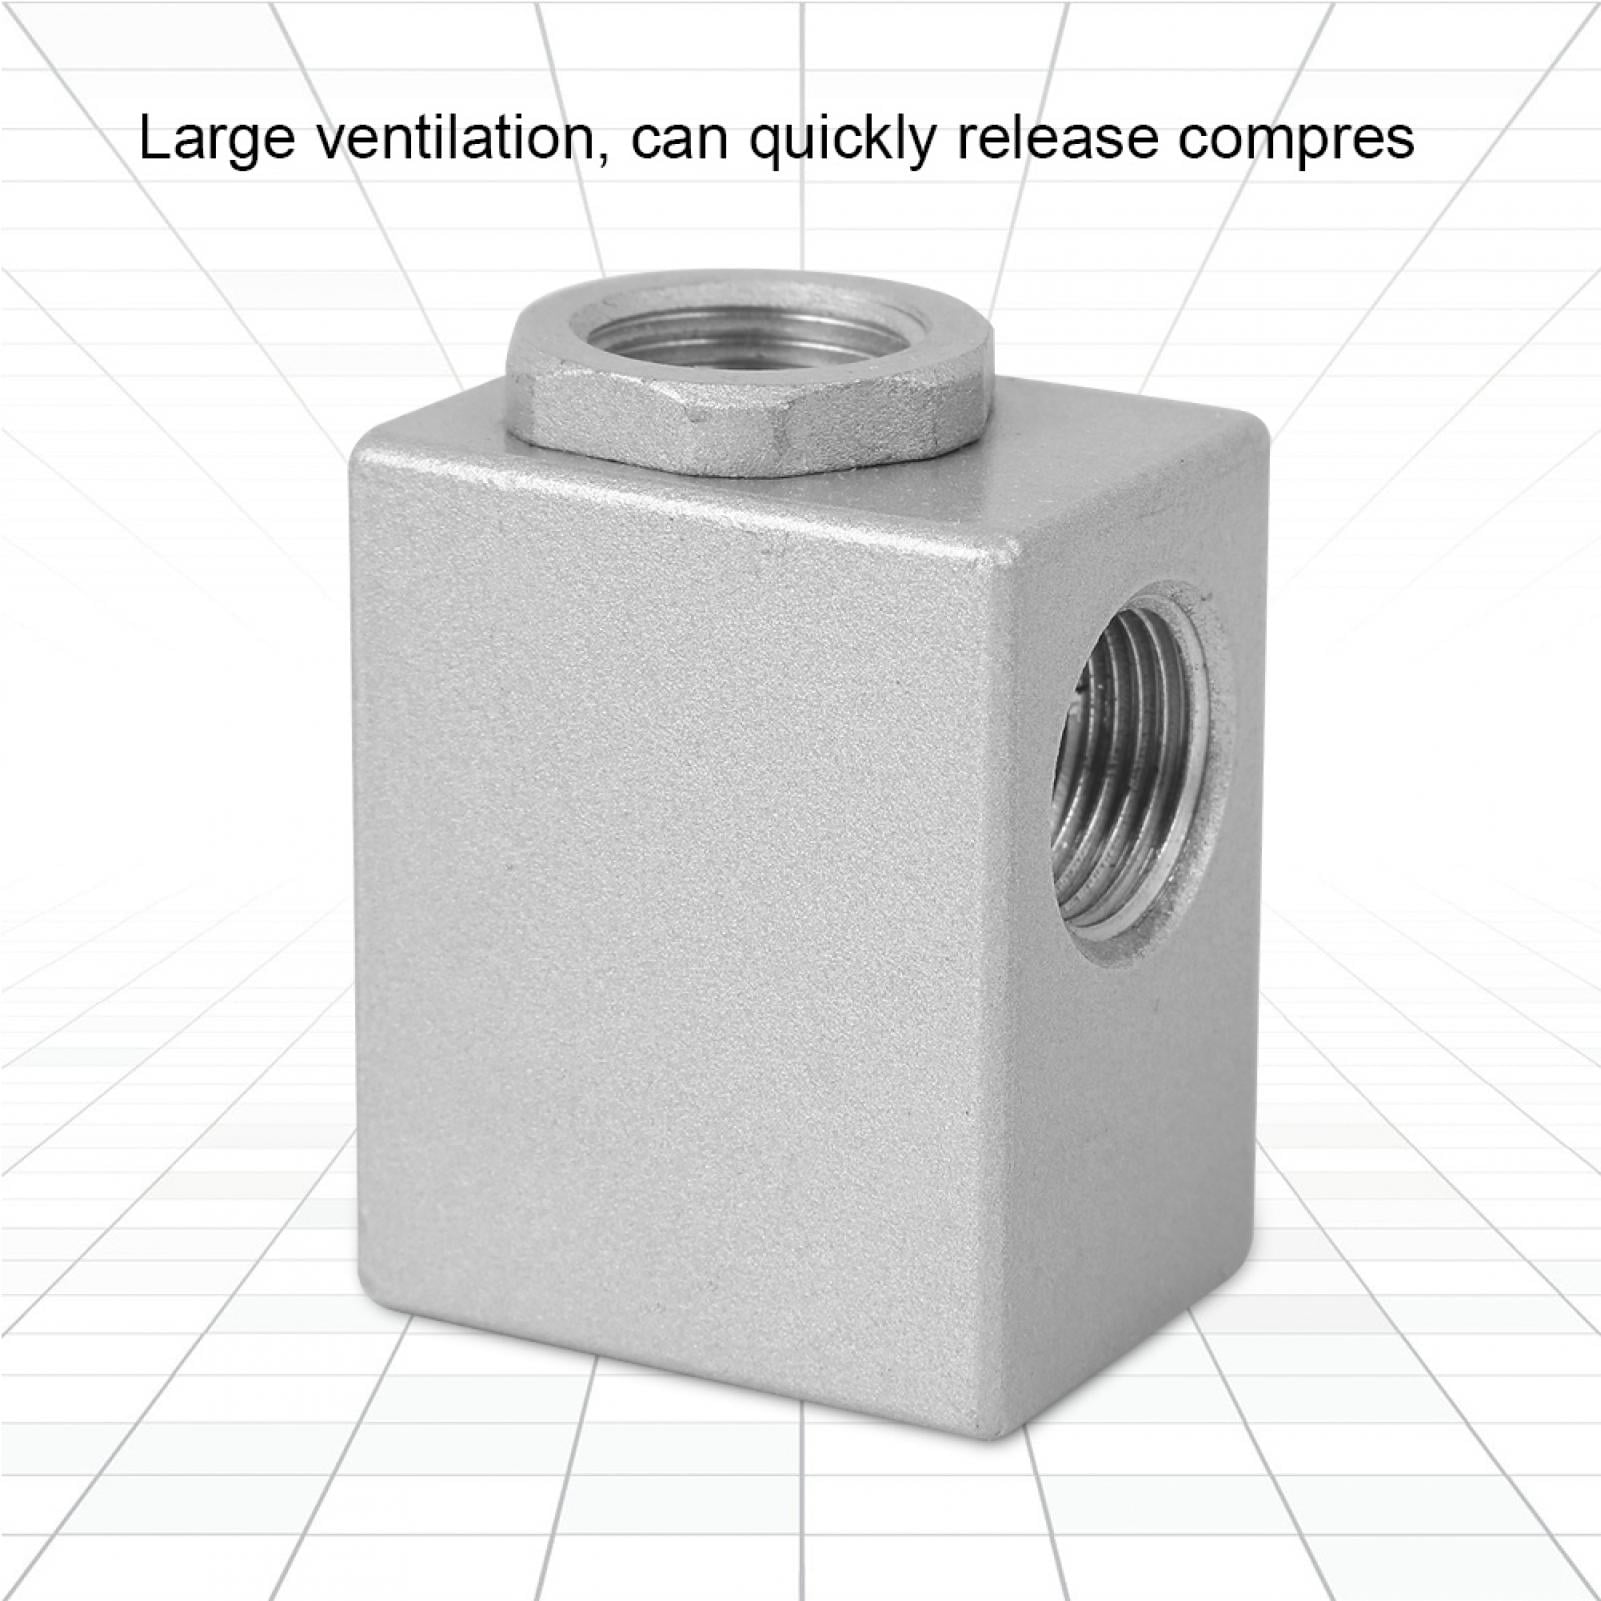 Quick Exhaust Valve G3/8in Aluminum Alloy Large Ventilation for Air 0-0.95Mpa QE-03 